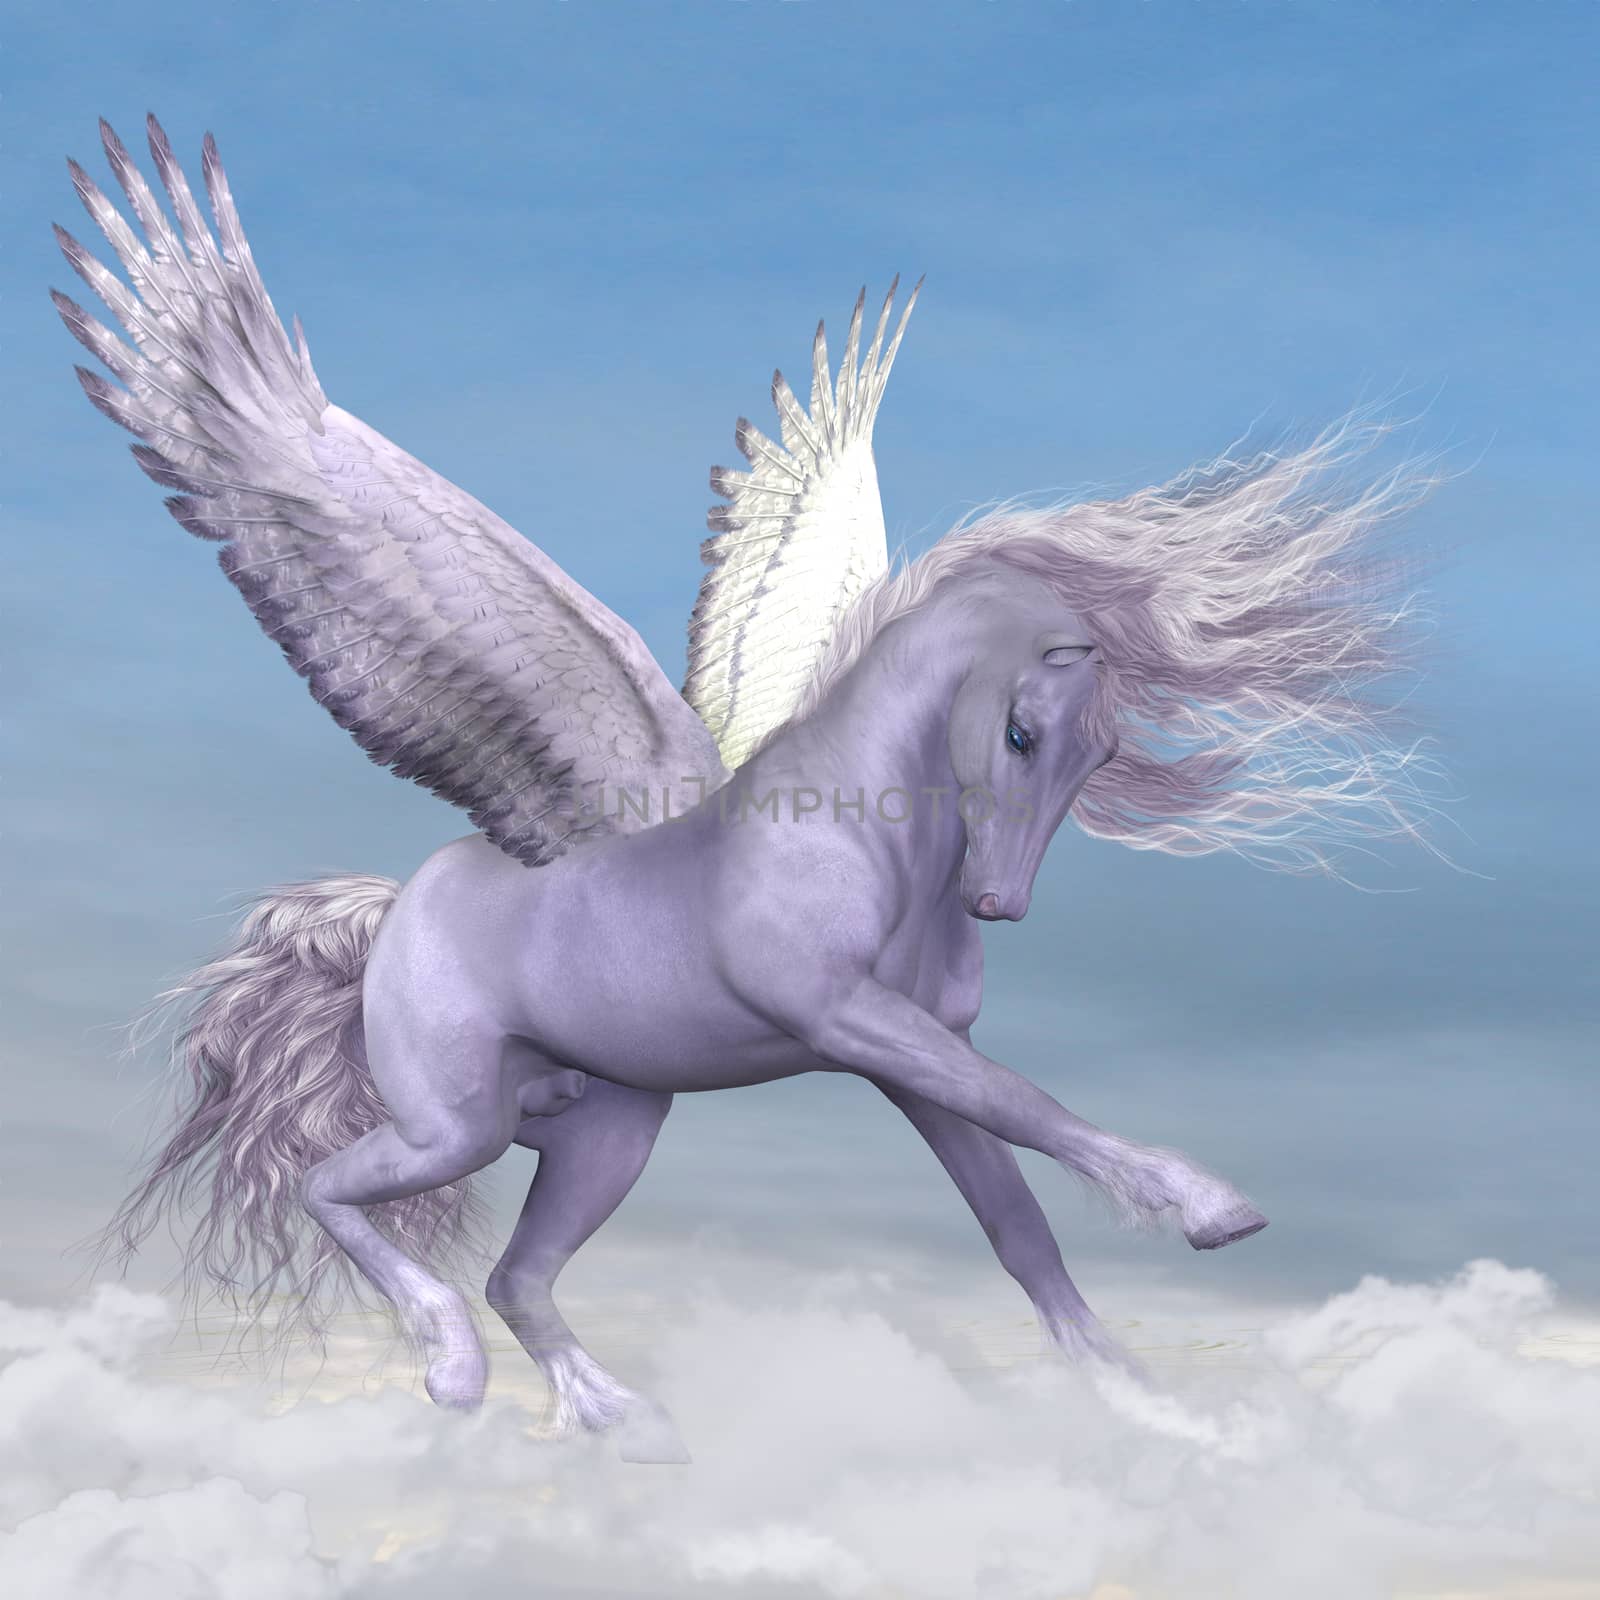 Pegasus among the Clouds by Catmando